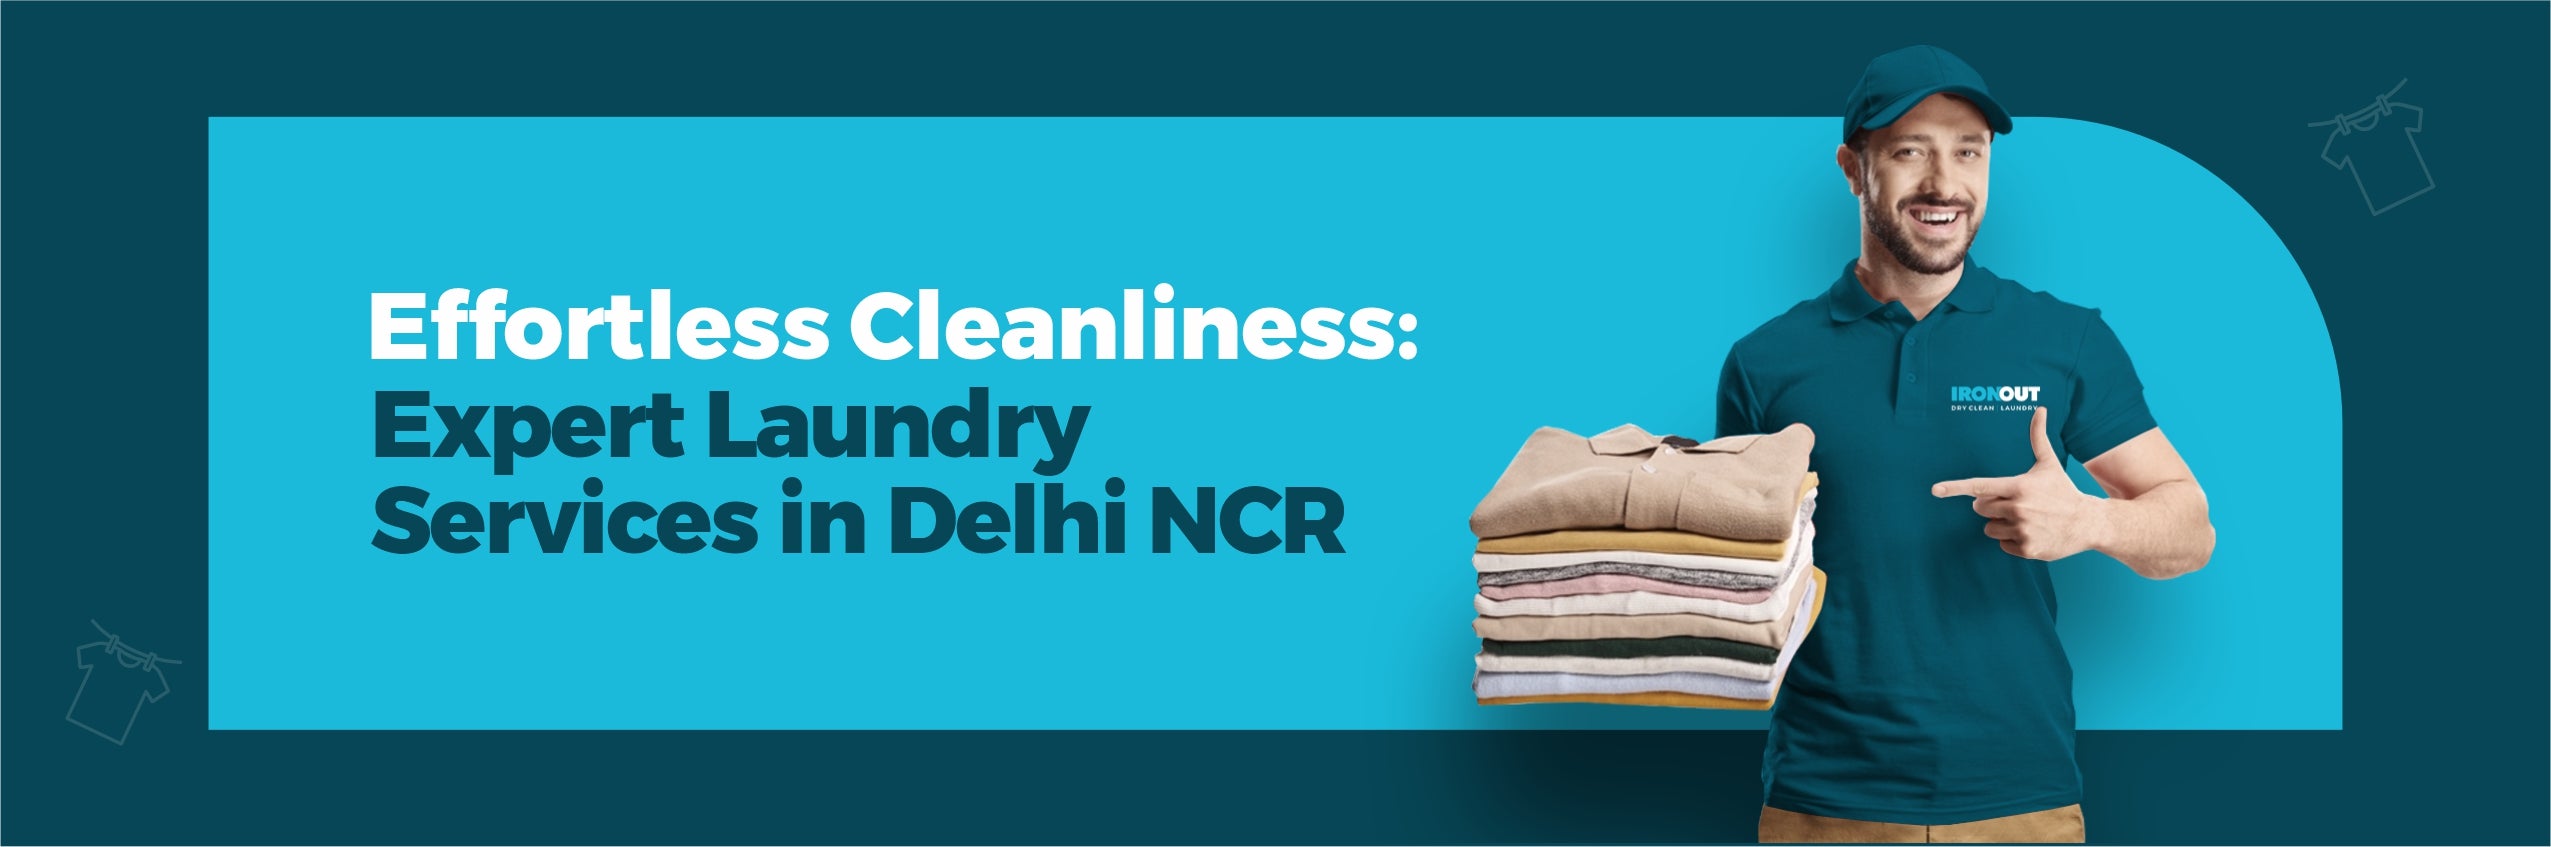 Effortless Cleanliness: Expert Laundry Services in Delhi NCR